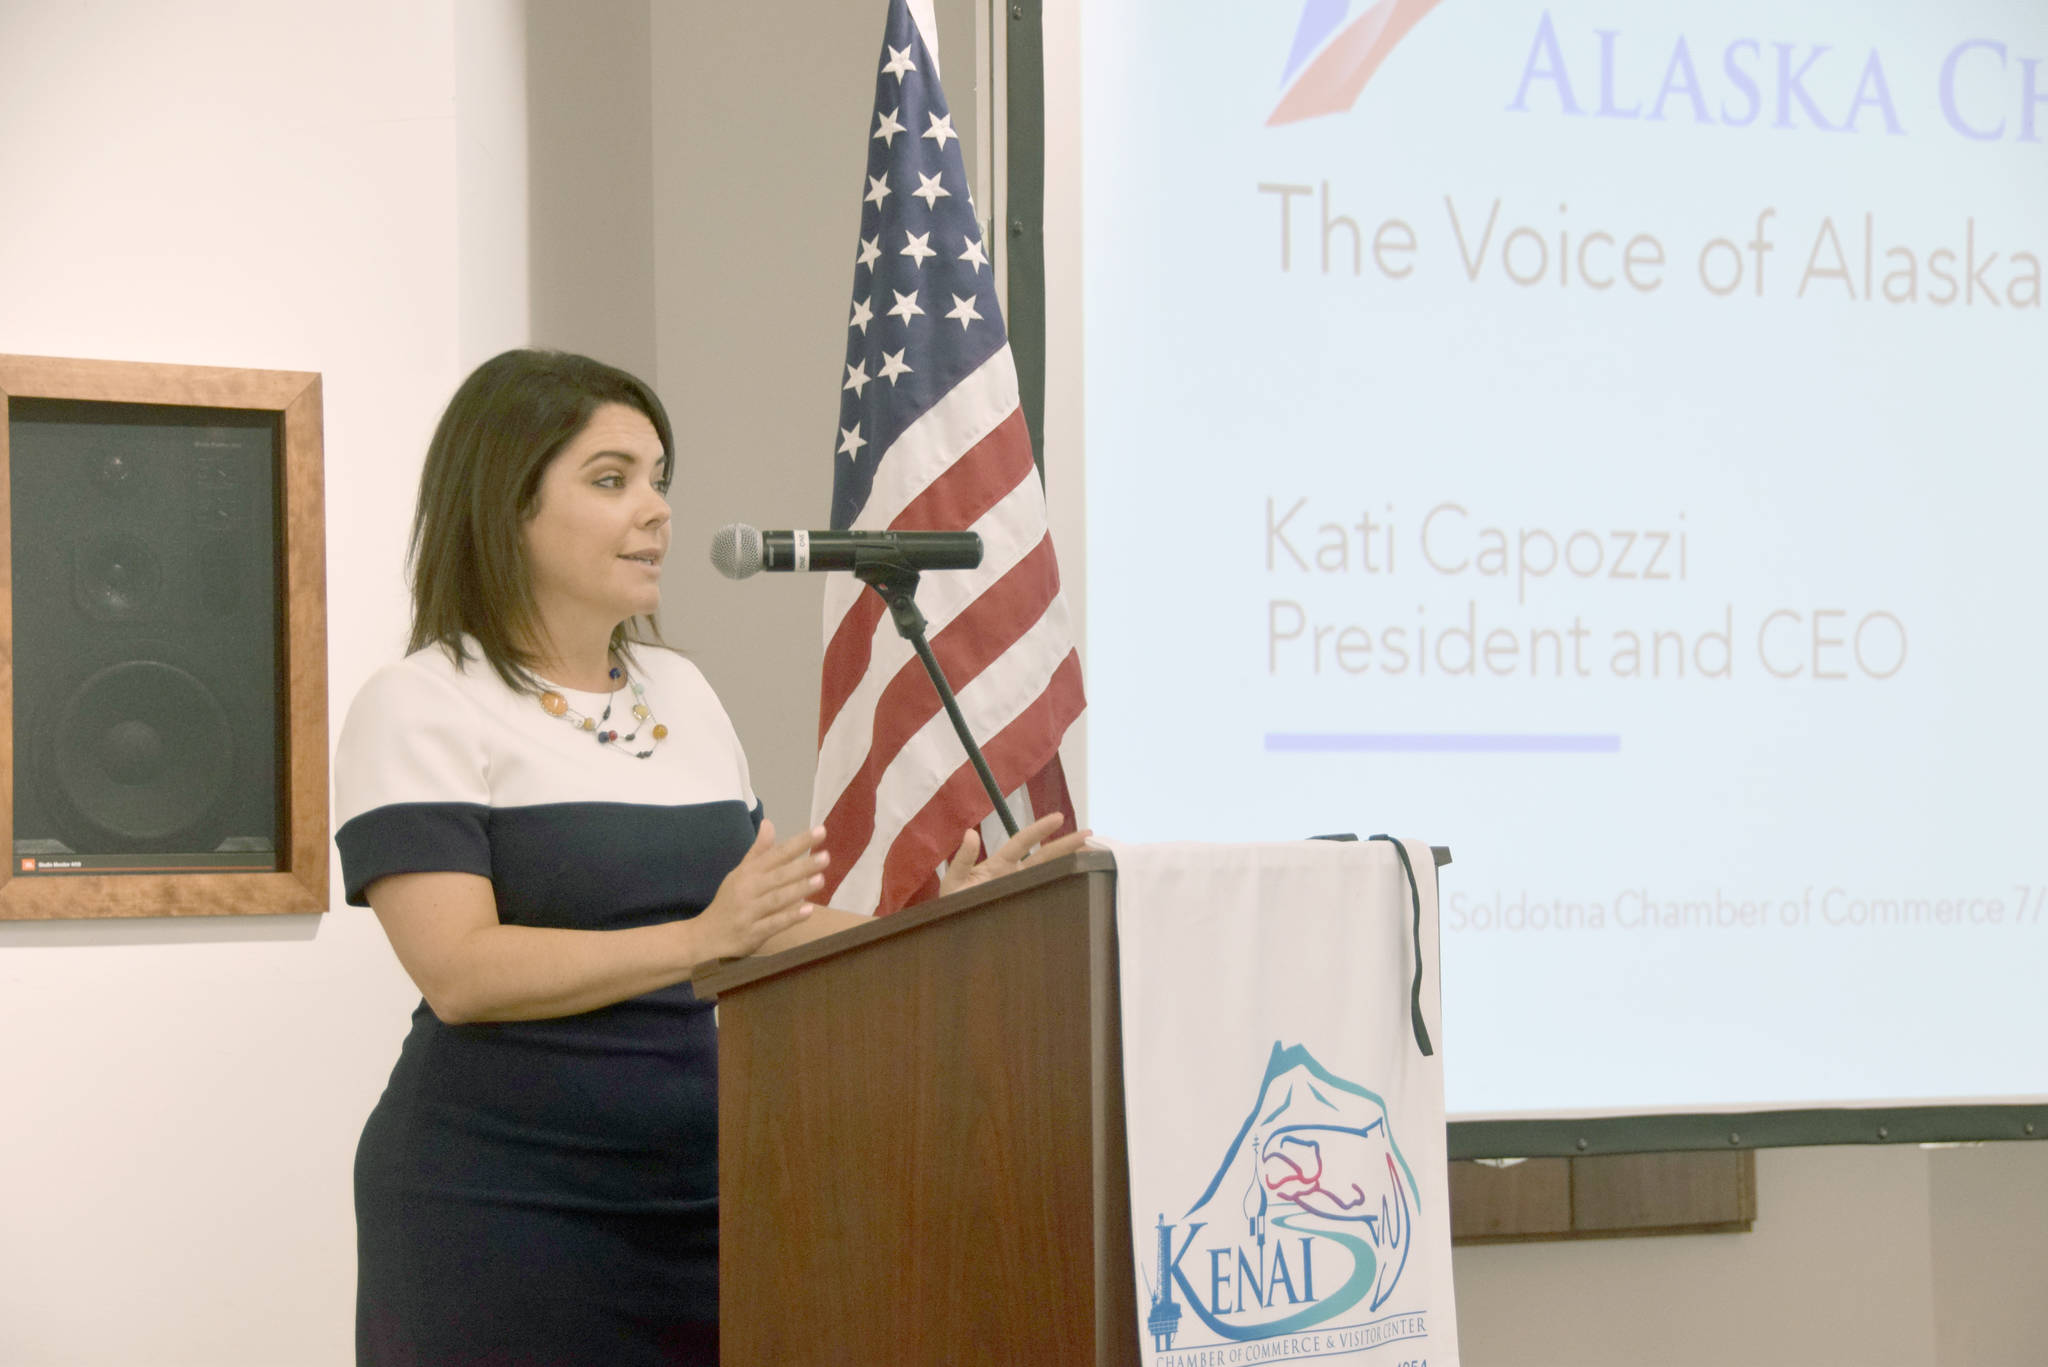 Kati Capozzi, president and CEO of the Alaska Chamber of Commerce, gives a presentation to the Kenai Chamber of Commerce on Wednesday. (Photo by Brian Mazurek/Peninsula Clarion)